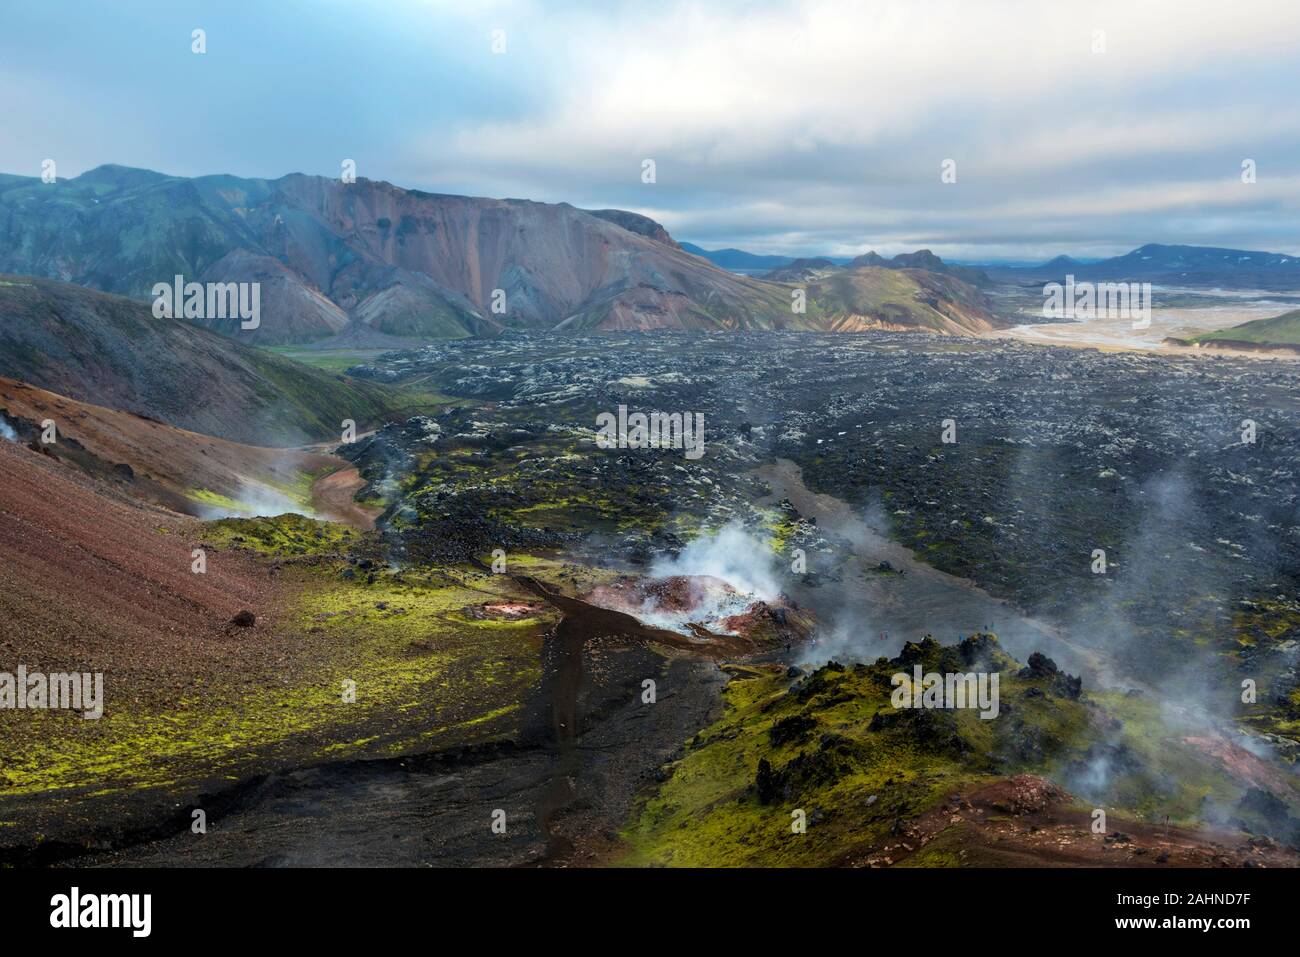 Active fumaroles and solfataras in the slope of Brennisteinsalda Volcano mountain in Landmannalaugar region of Iceland Highlands. The lava field and t Stock Photo